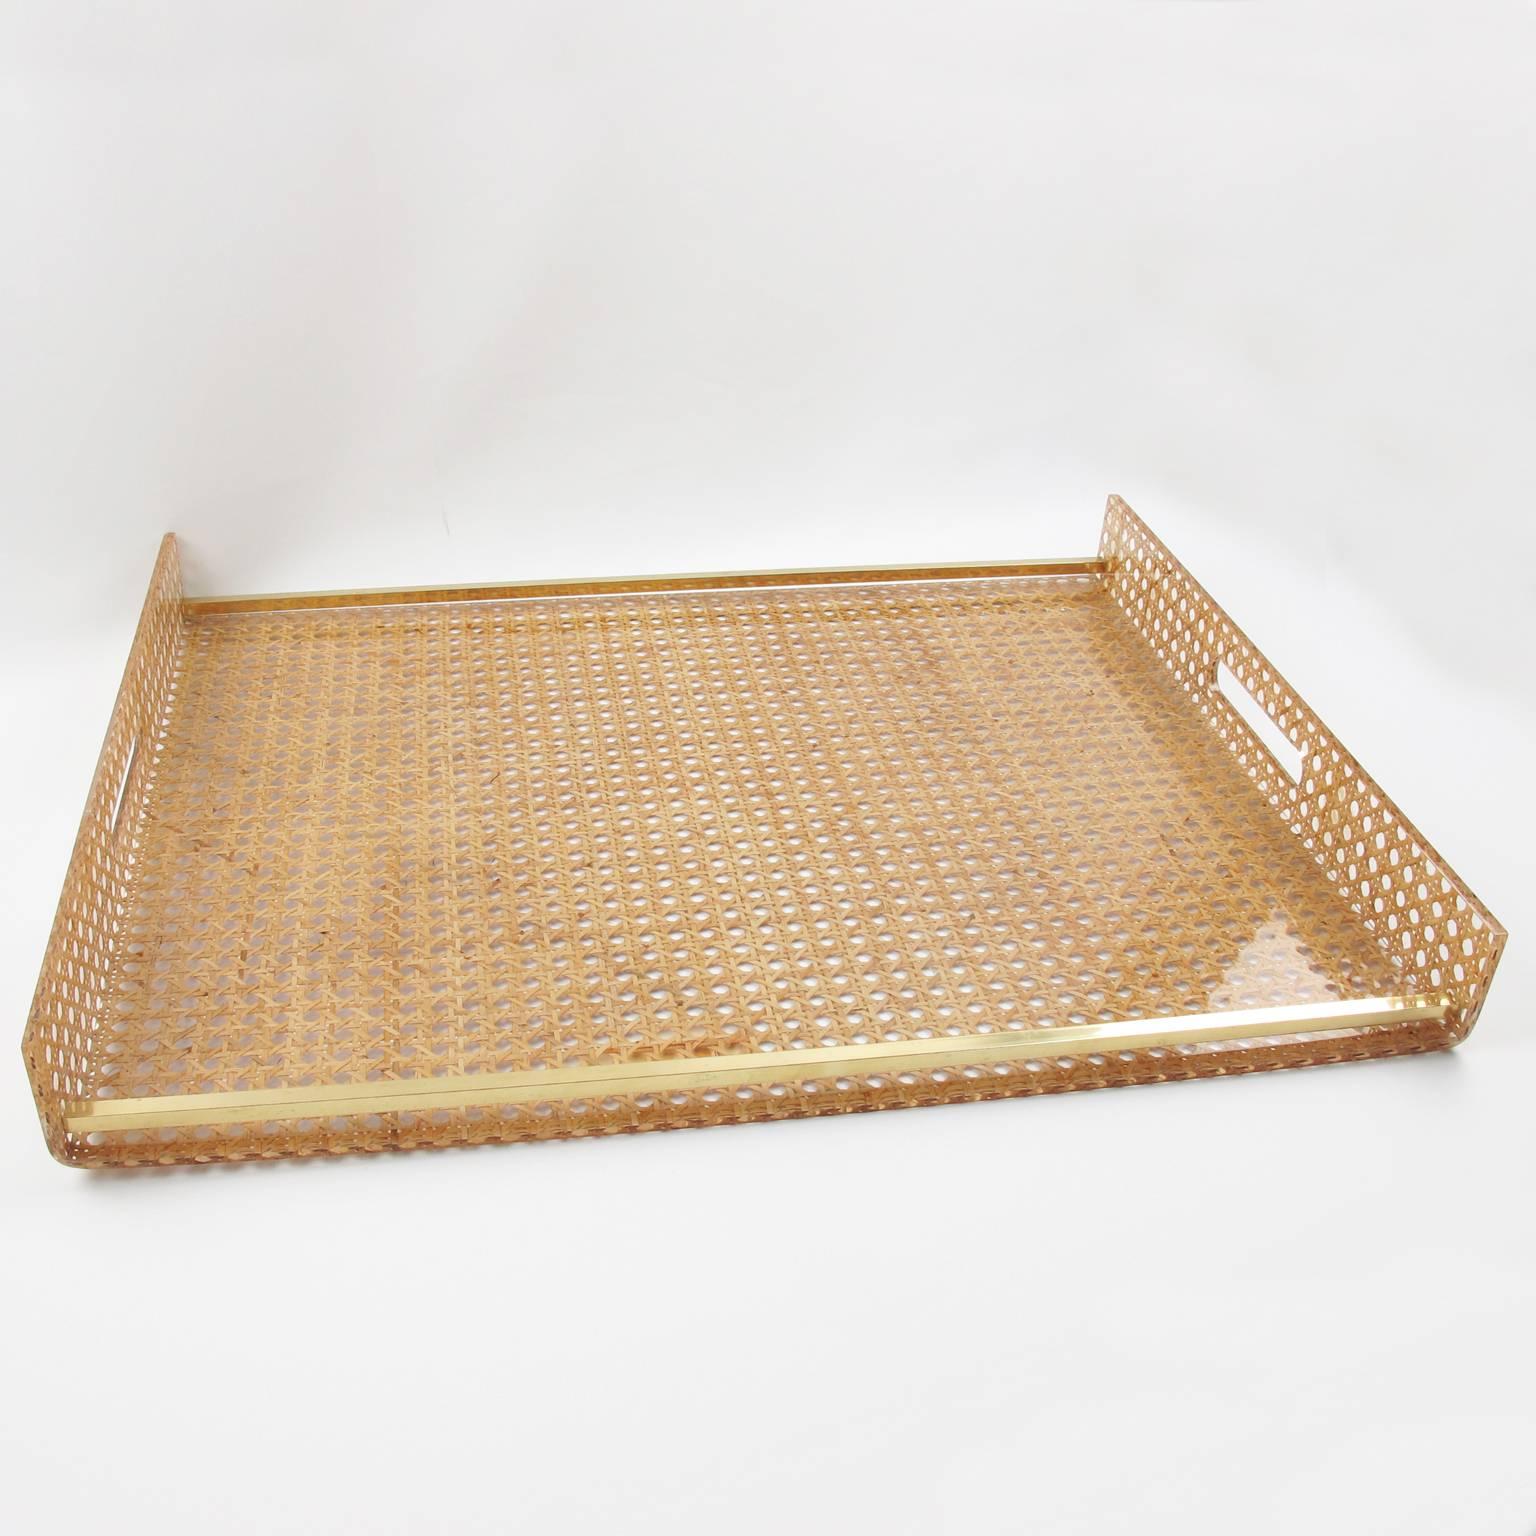 Elegant large butler serving tray made of Lucite and Rattan designed for Christian Dior Home Collection in 1970s. Geometric shape with gilt brass gallery and real rattan cane-work embedded in the crystal clear Lucite. Great accessory for any modern